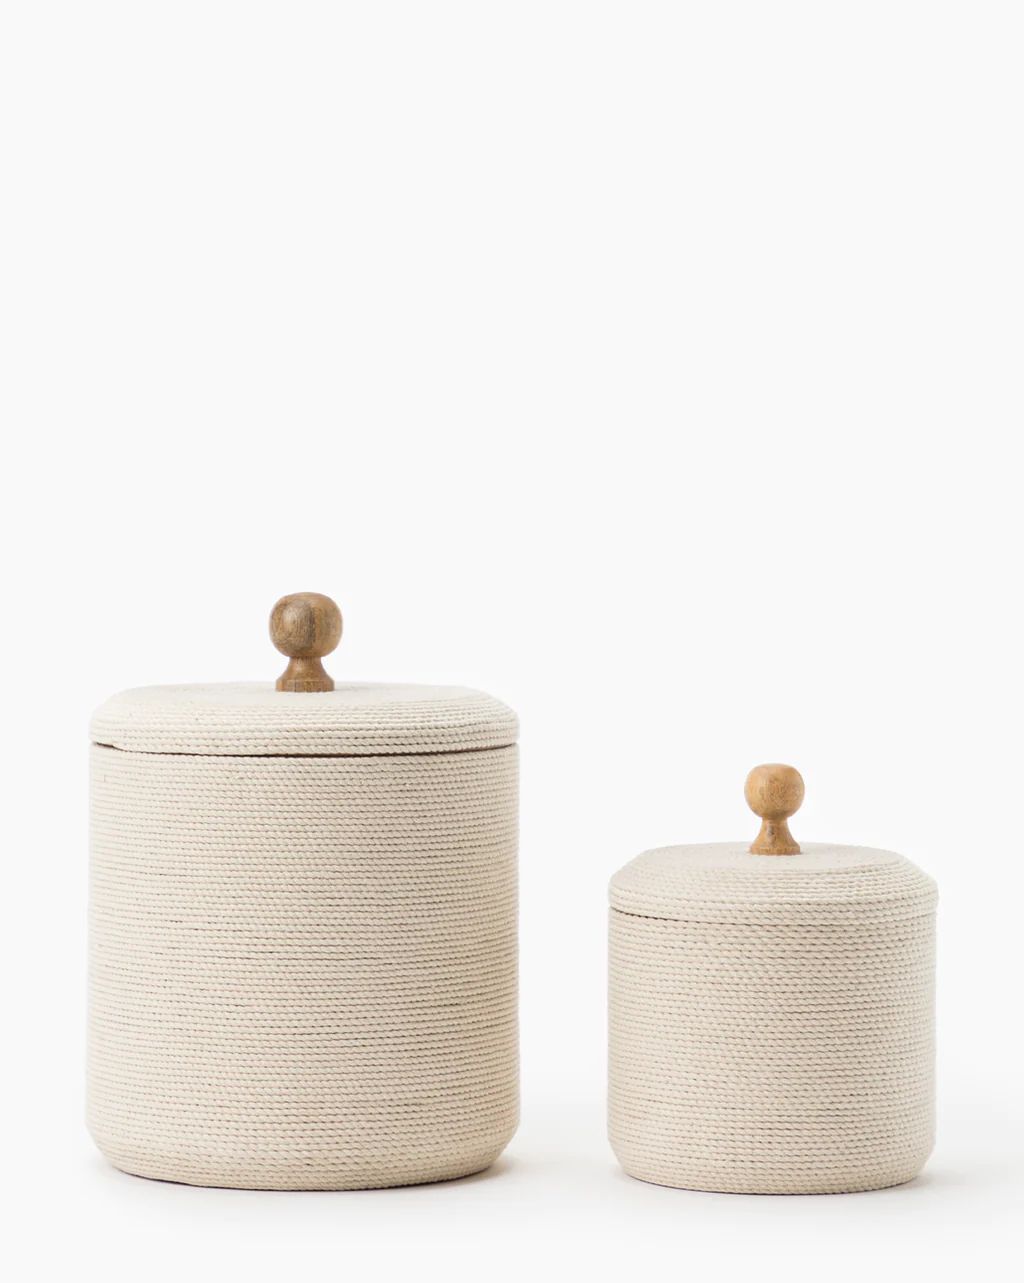 Wrapped Lidded Container | McGee & Co.